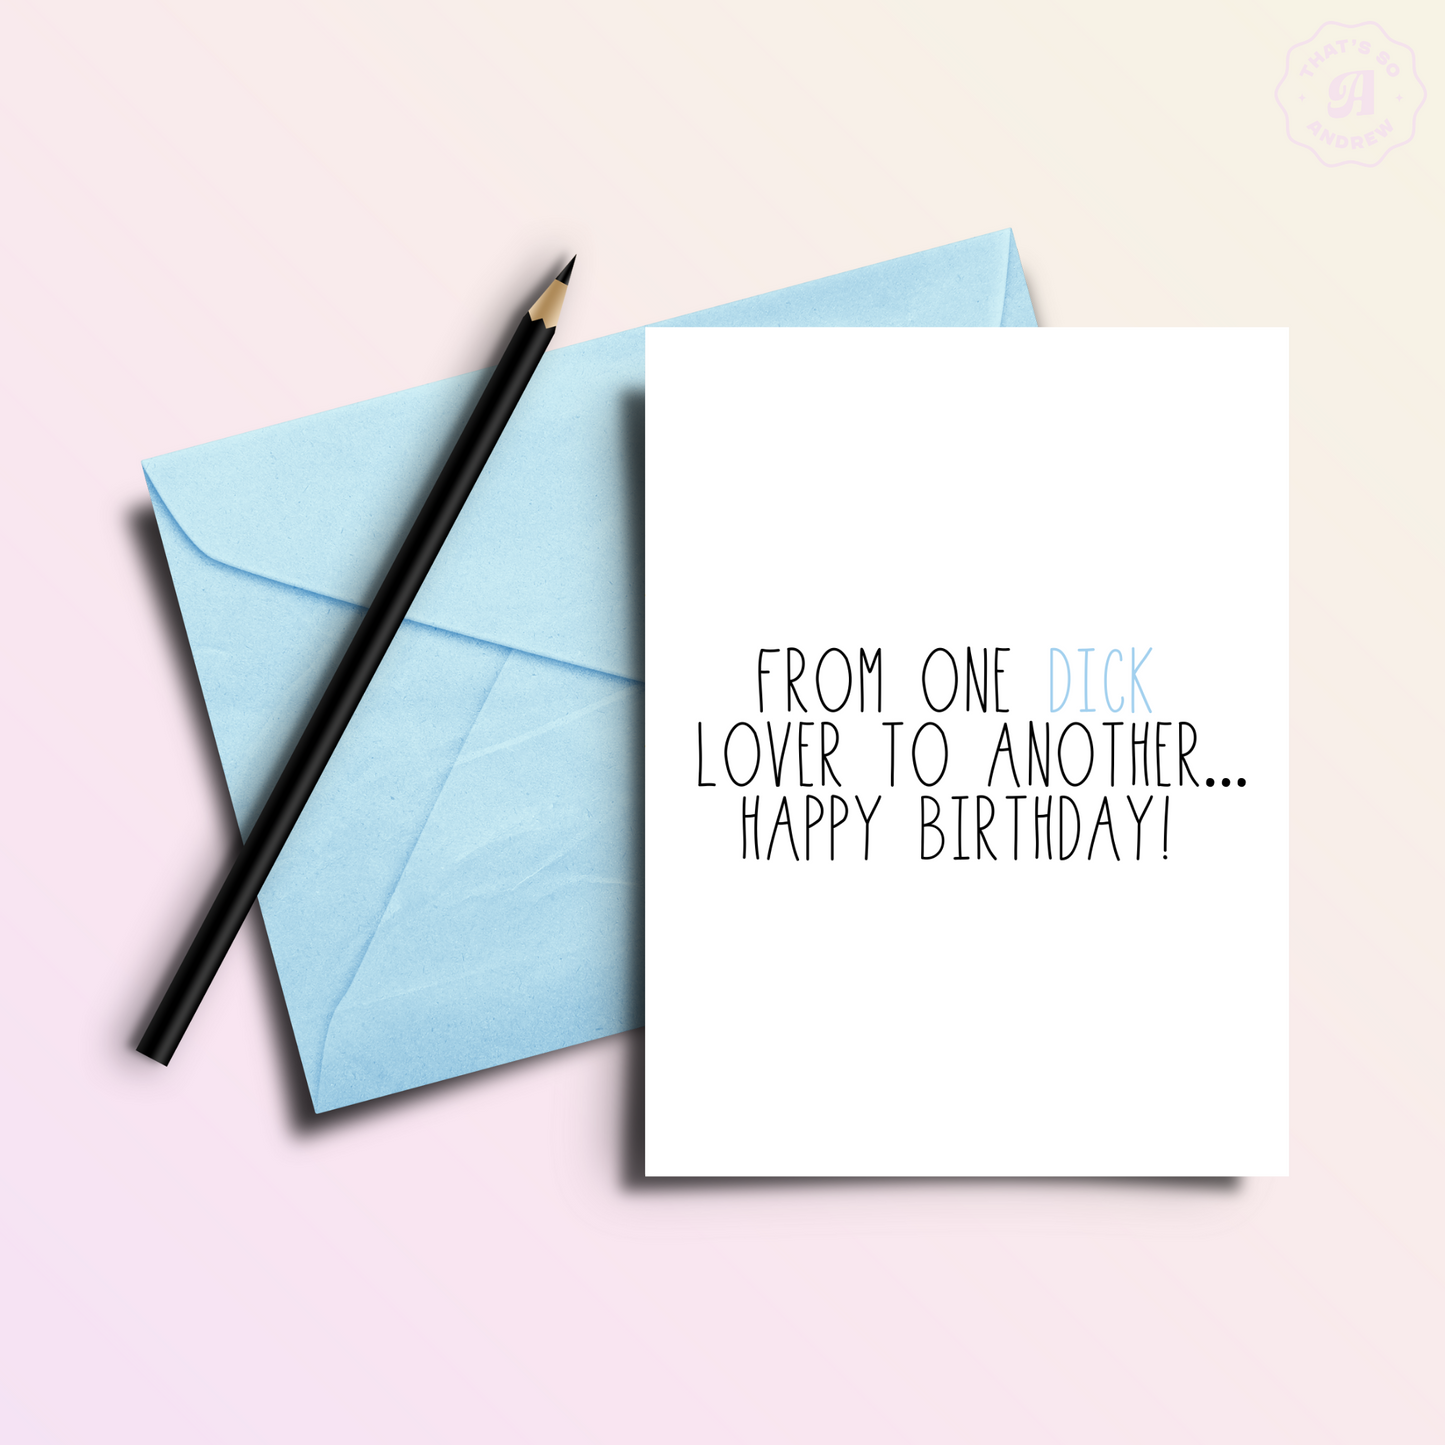 From One Lover of Dick to Another Birthday Card